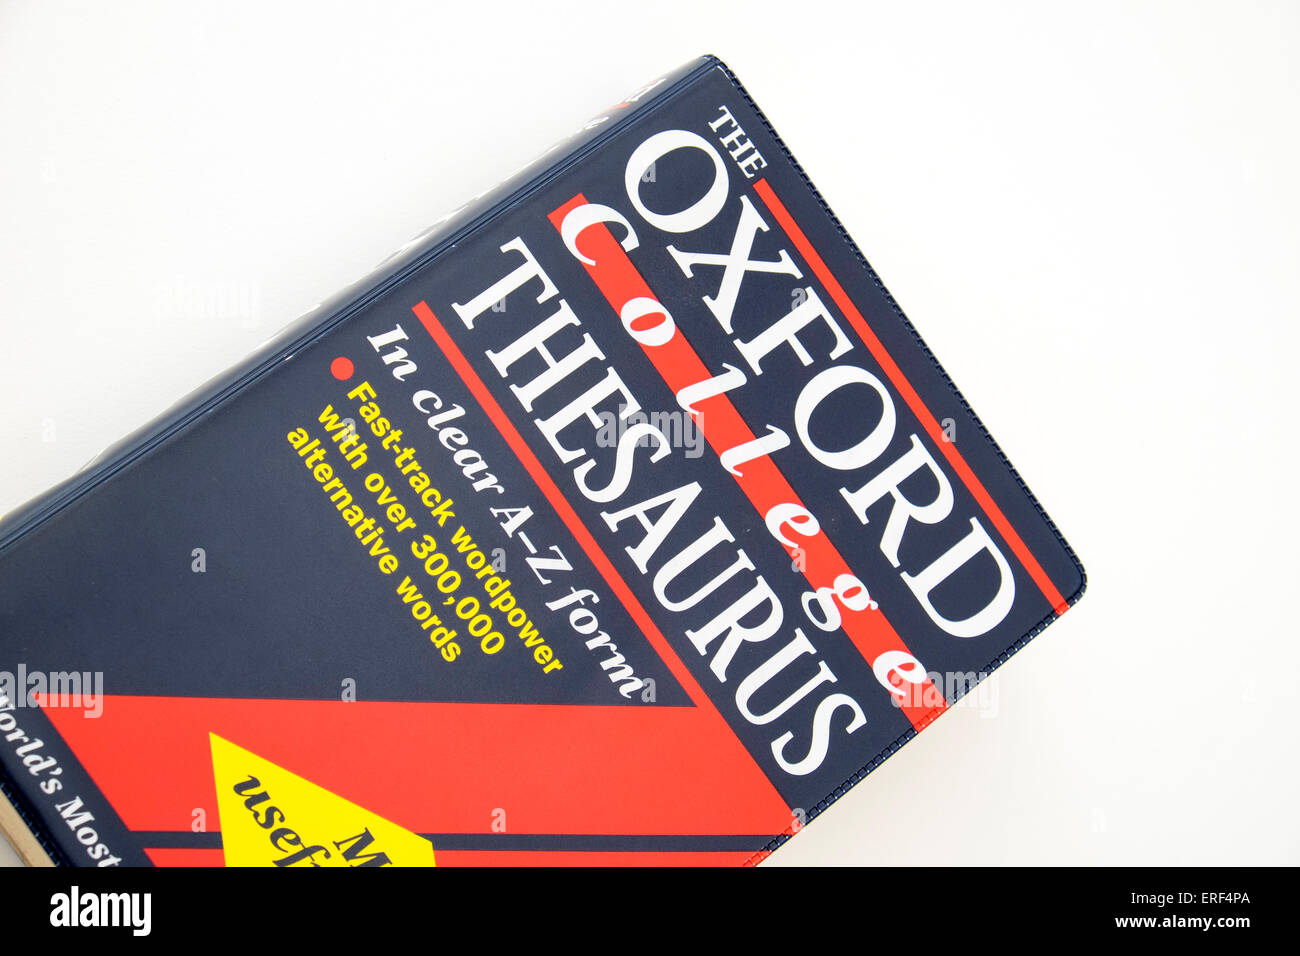 Oxford College Thesaurus dictionary for finding alternative words Stock Photo